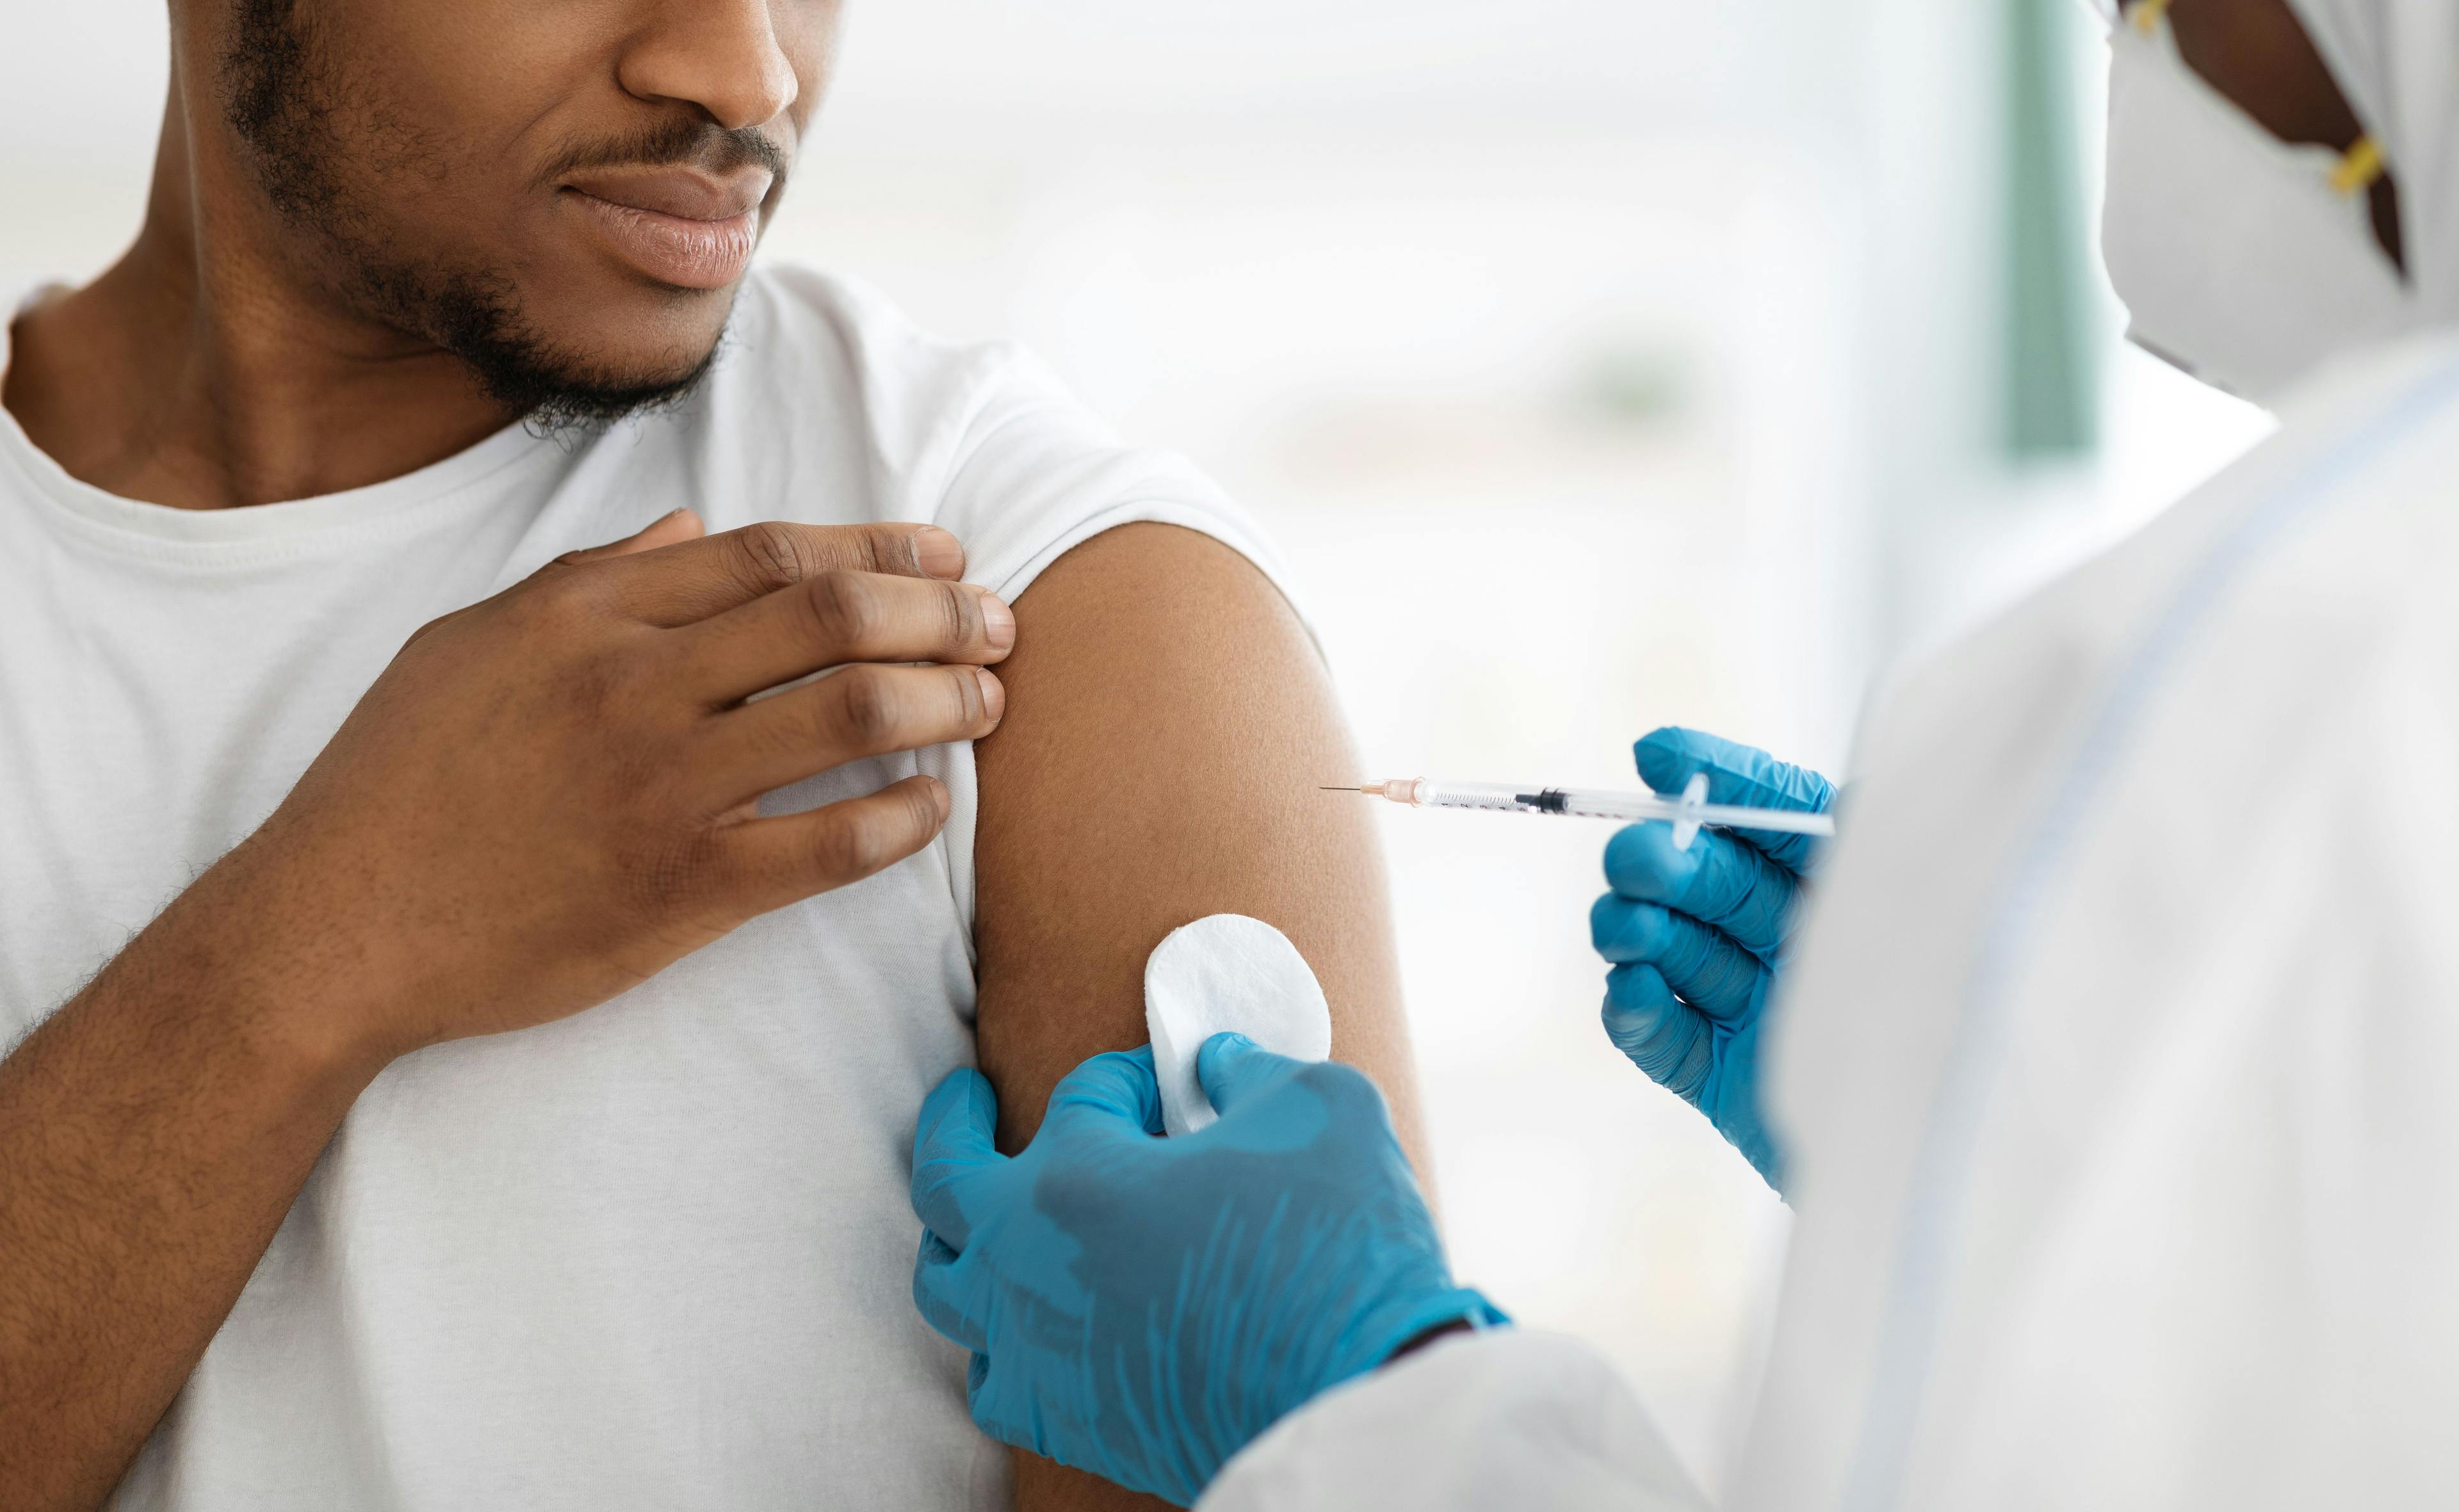 CDC Says US Will Transition to Trivalent Vaccines Next Flu Season